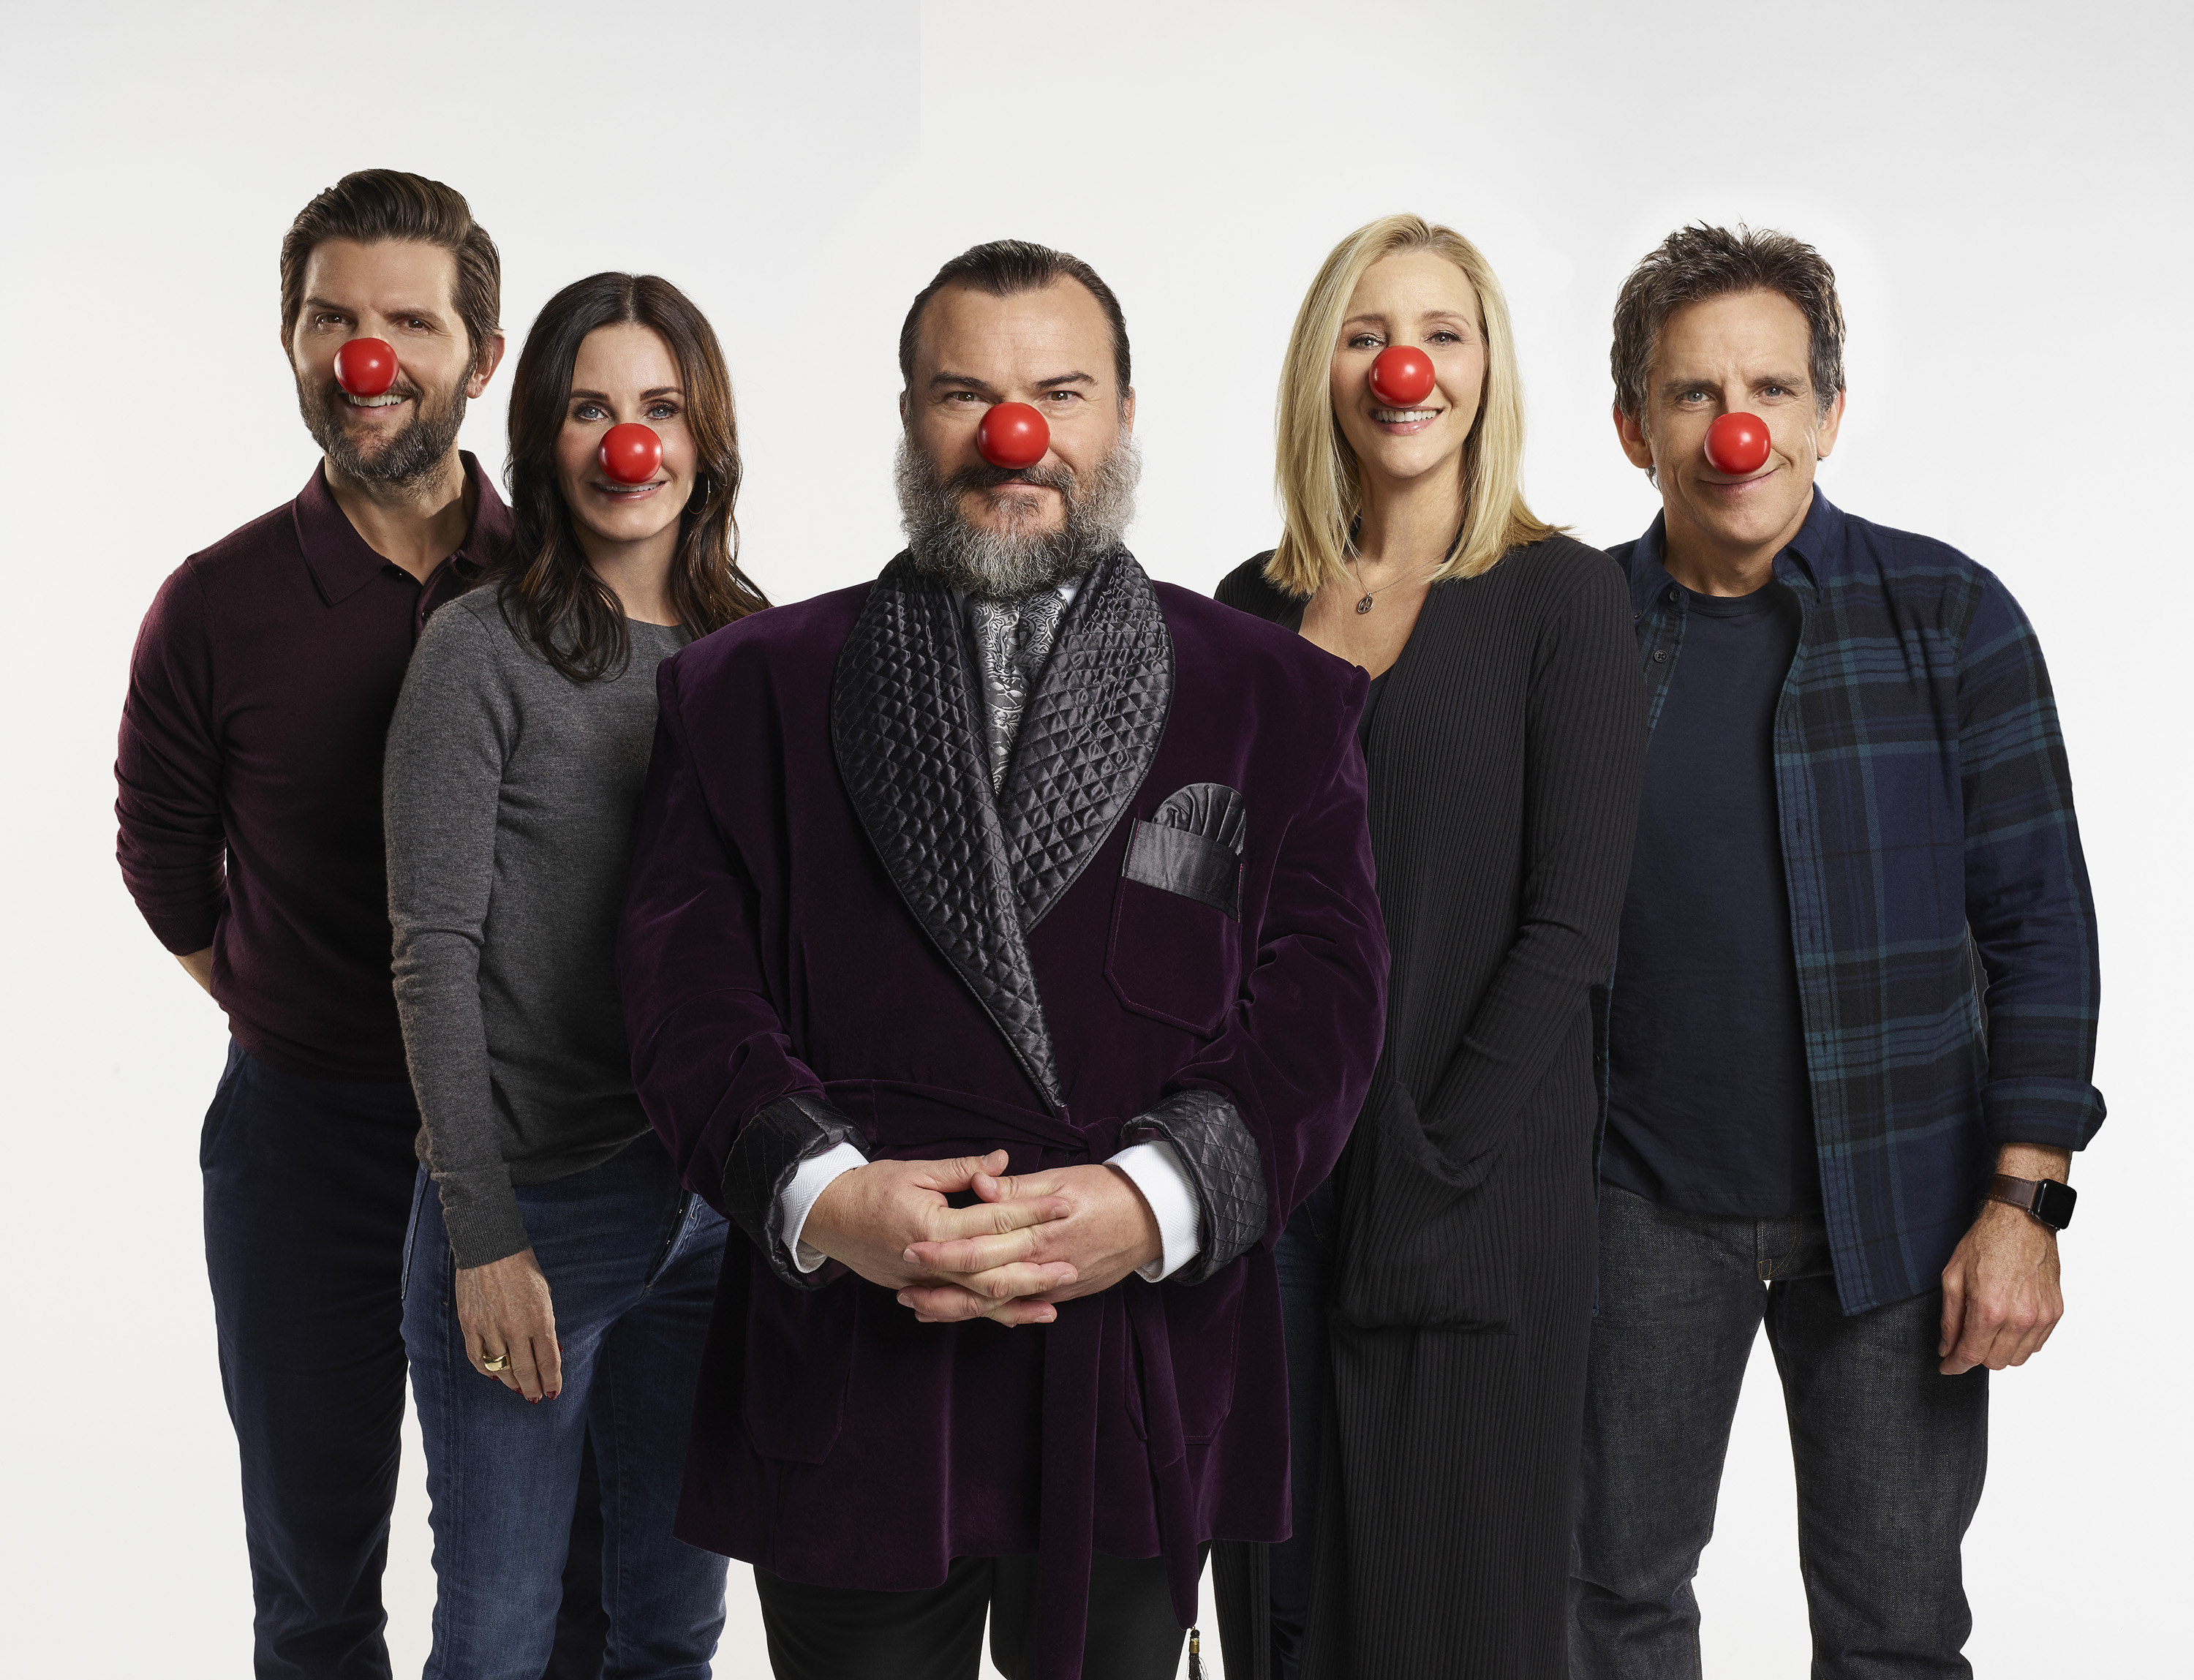 Red Nose Day to return Thursday, May 21, 2020 – NBC’s special night of Red Nose Day programming supporting the annual campaign to end child poverty will lead with star-studded Celebrity Escape Room (L-R: Adam Scott, Courteney Cox, Jack Black, Lisa Kudrow, Ben Stiller).

Photo credit: Trae Patton/NBC
